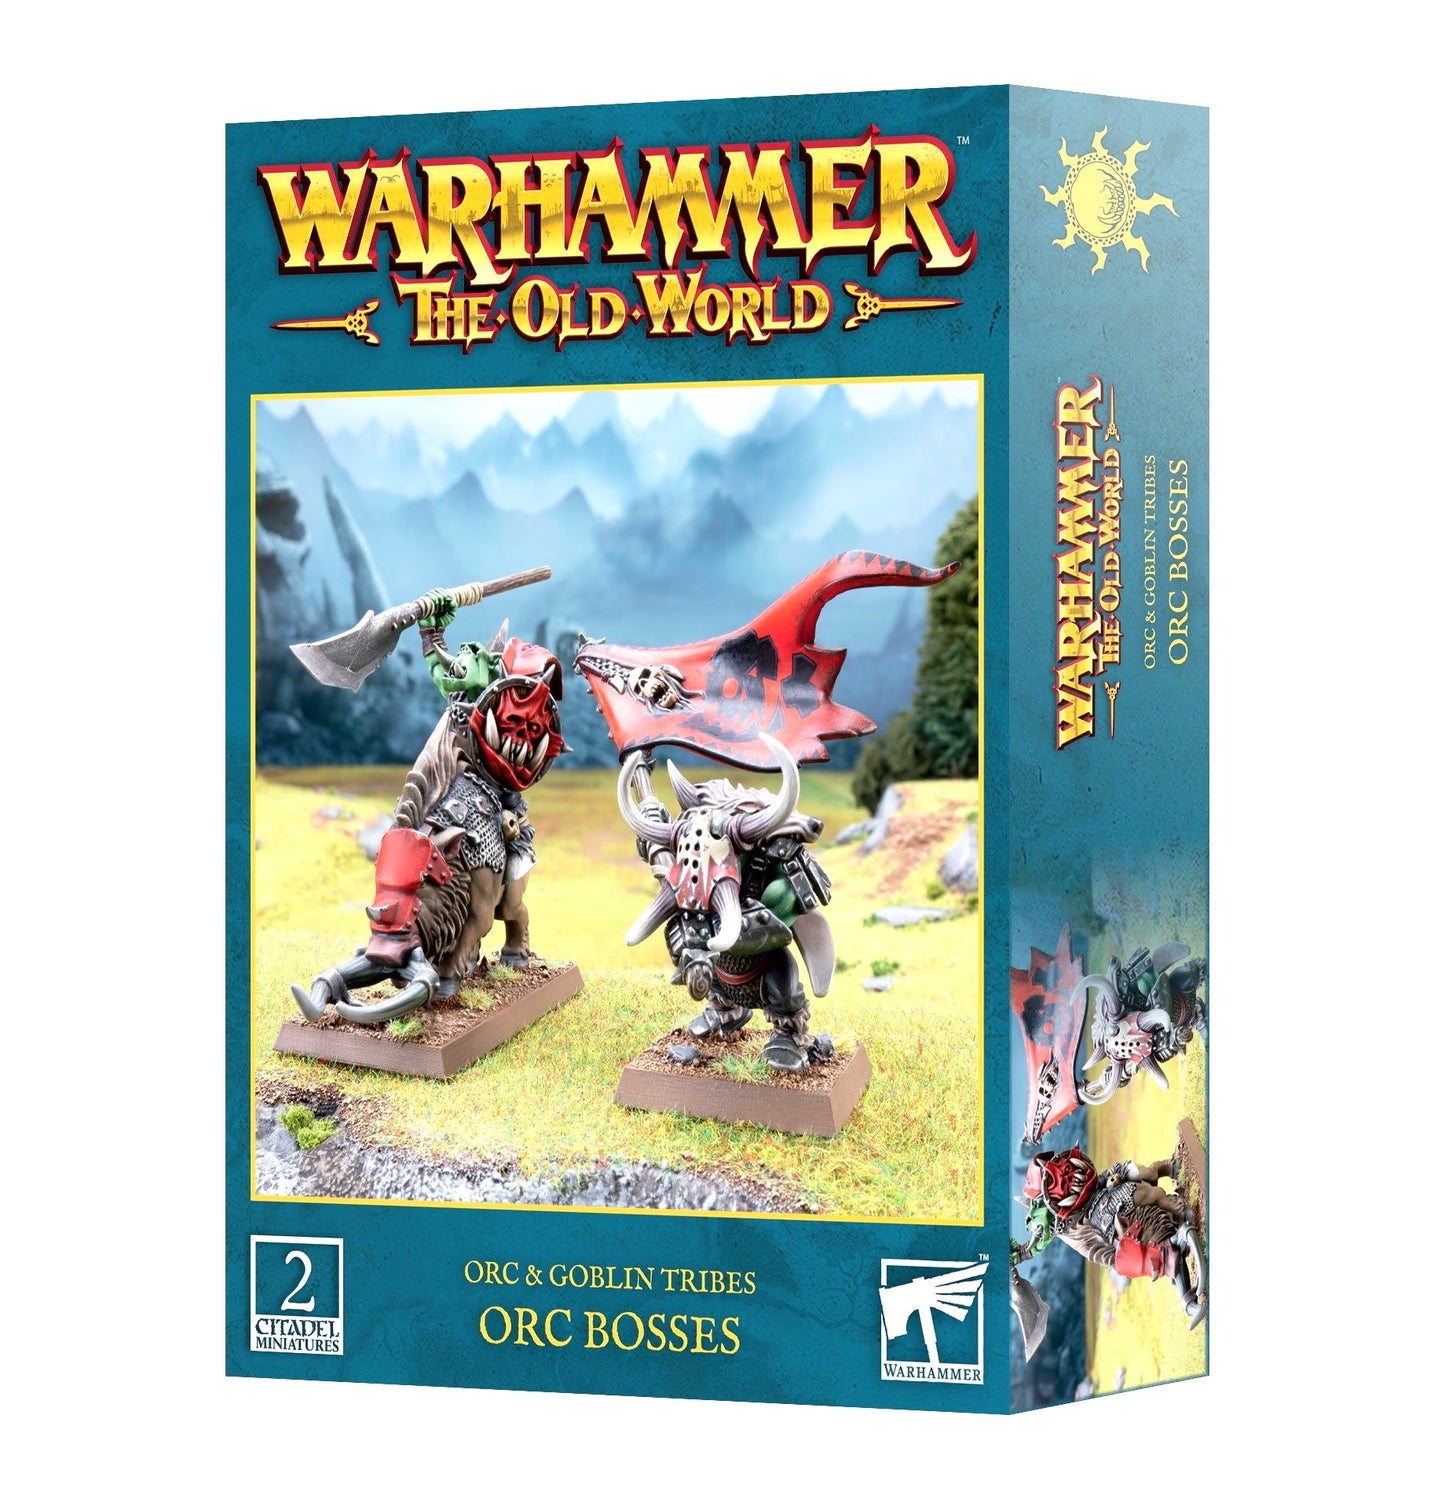 Orc Bosses - Orc & Goblin Tribes Warhammer Old World NIB! WBGames